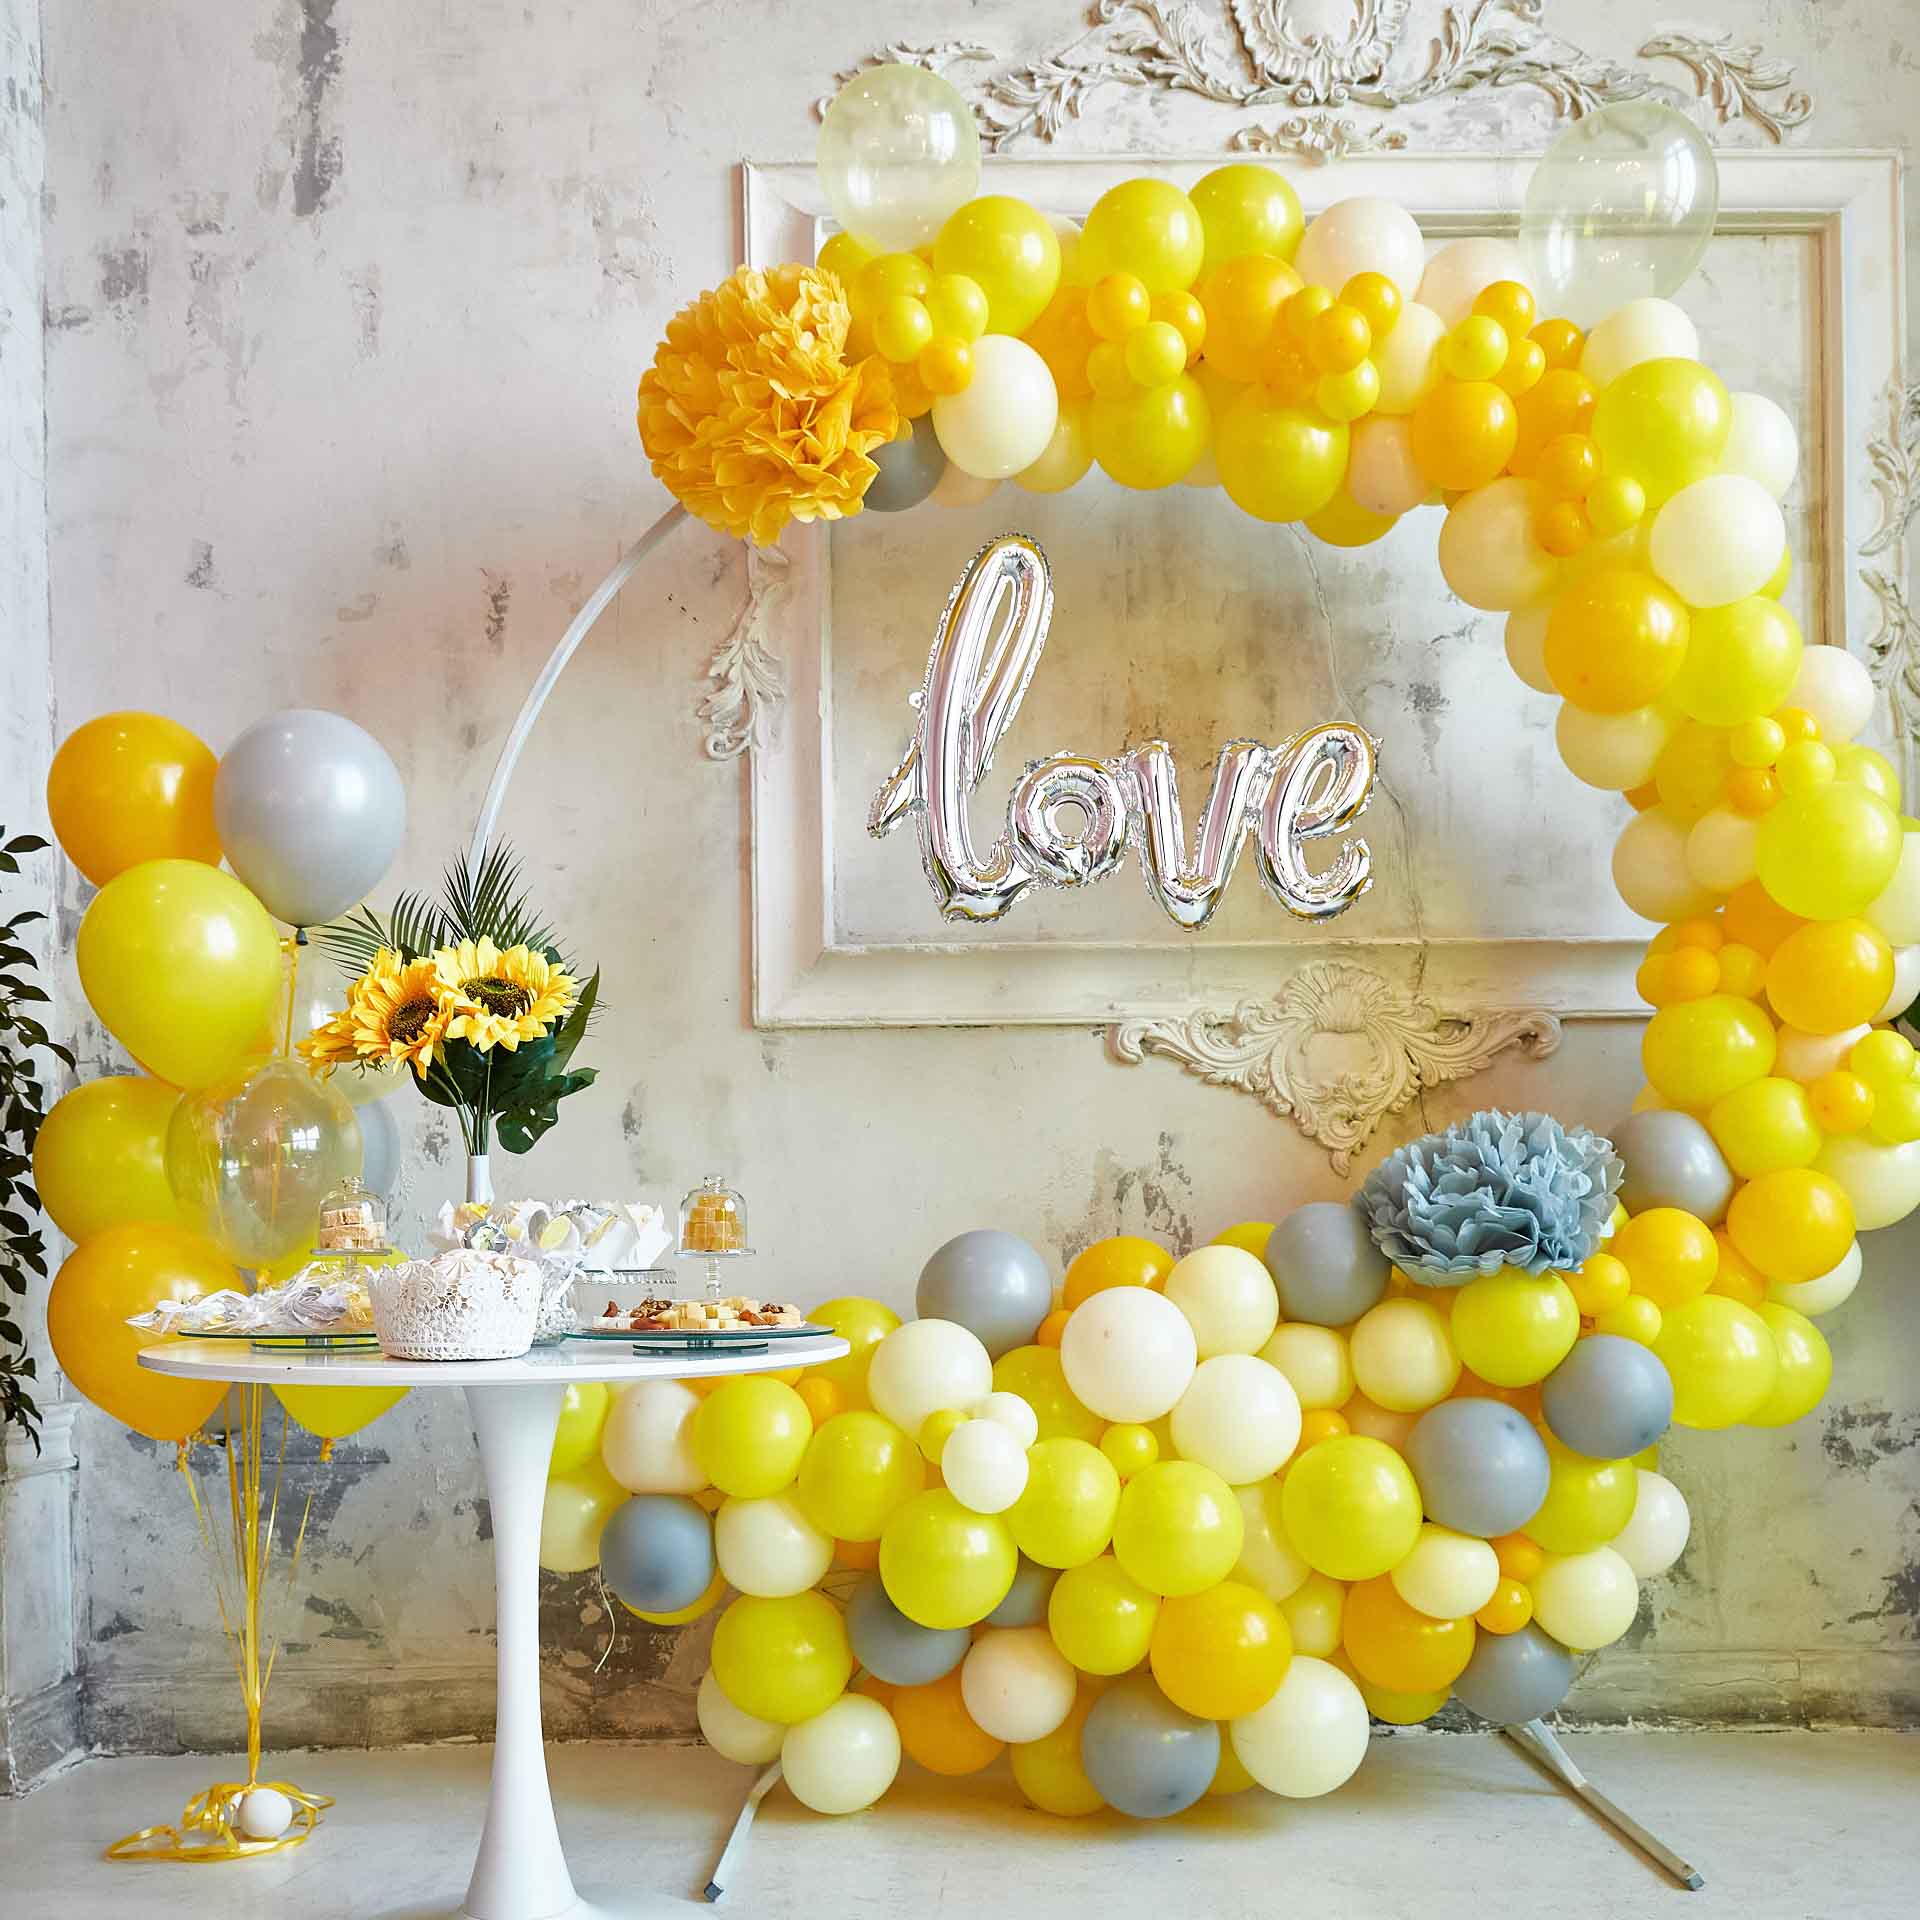 Balloon Decoration Ideas at Home - Colorful and Fun Party